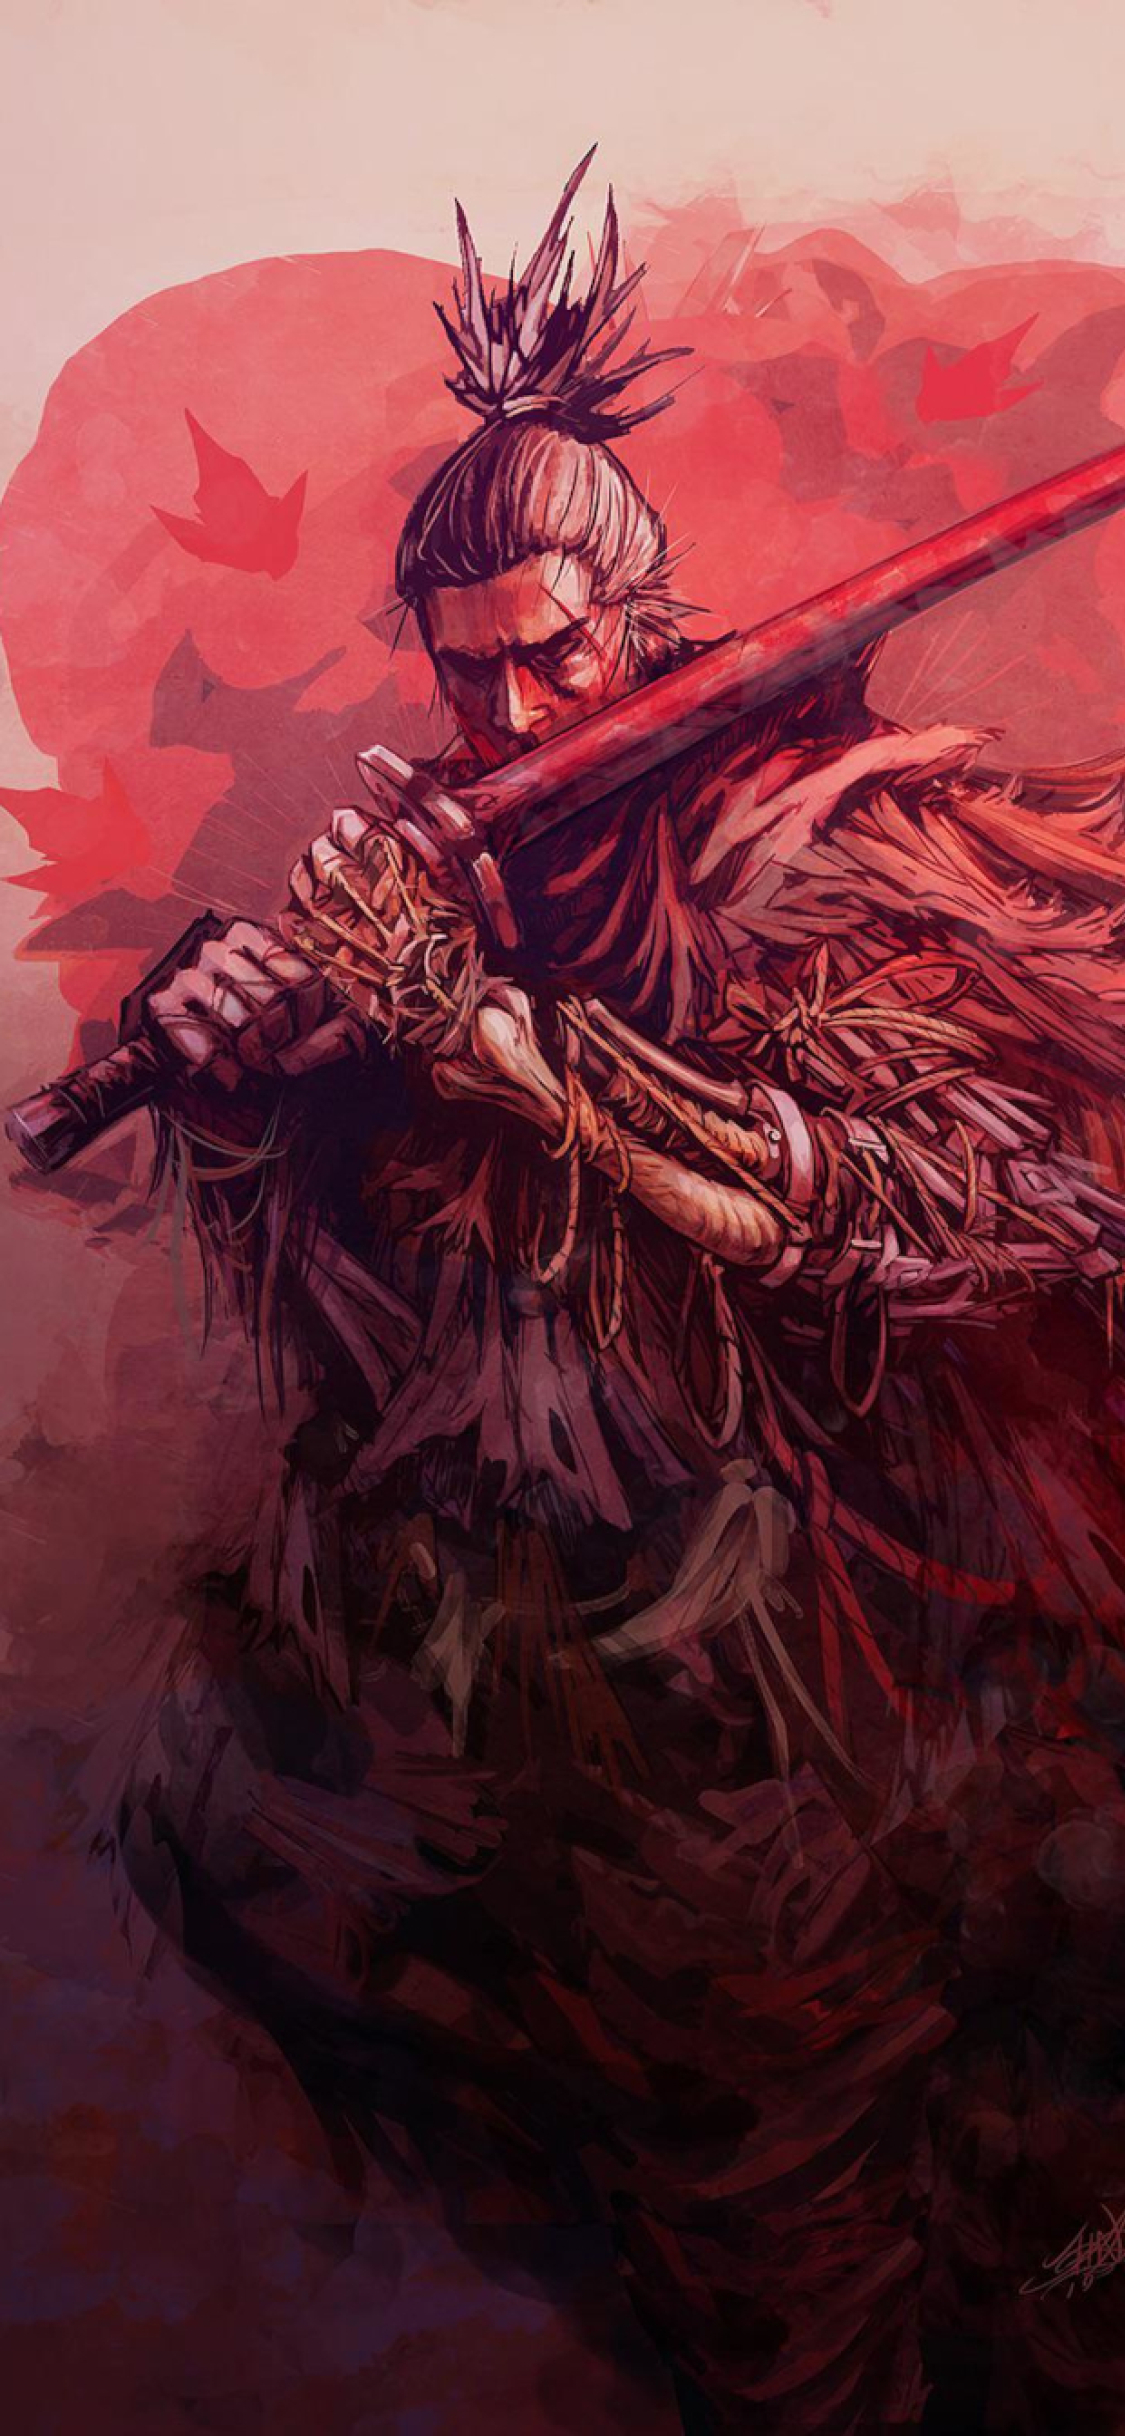 1125x2436 Sekiro Shadows Die Twice Art Iphone Xs Iphone 10 Iphone X Wallpaper Hd Games 4k Wallpapers Images Photos And Background